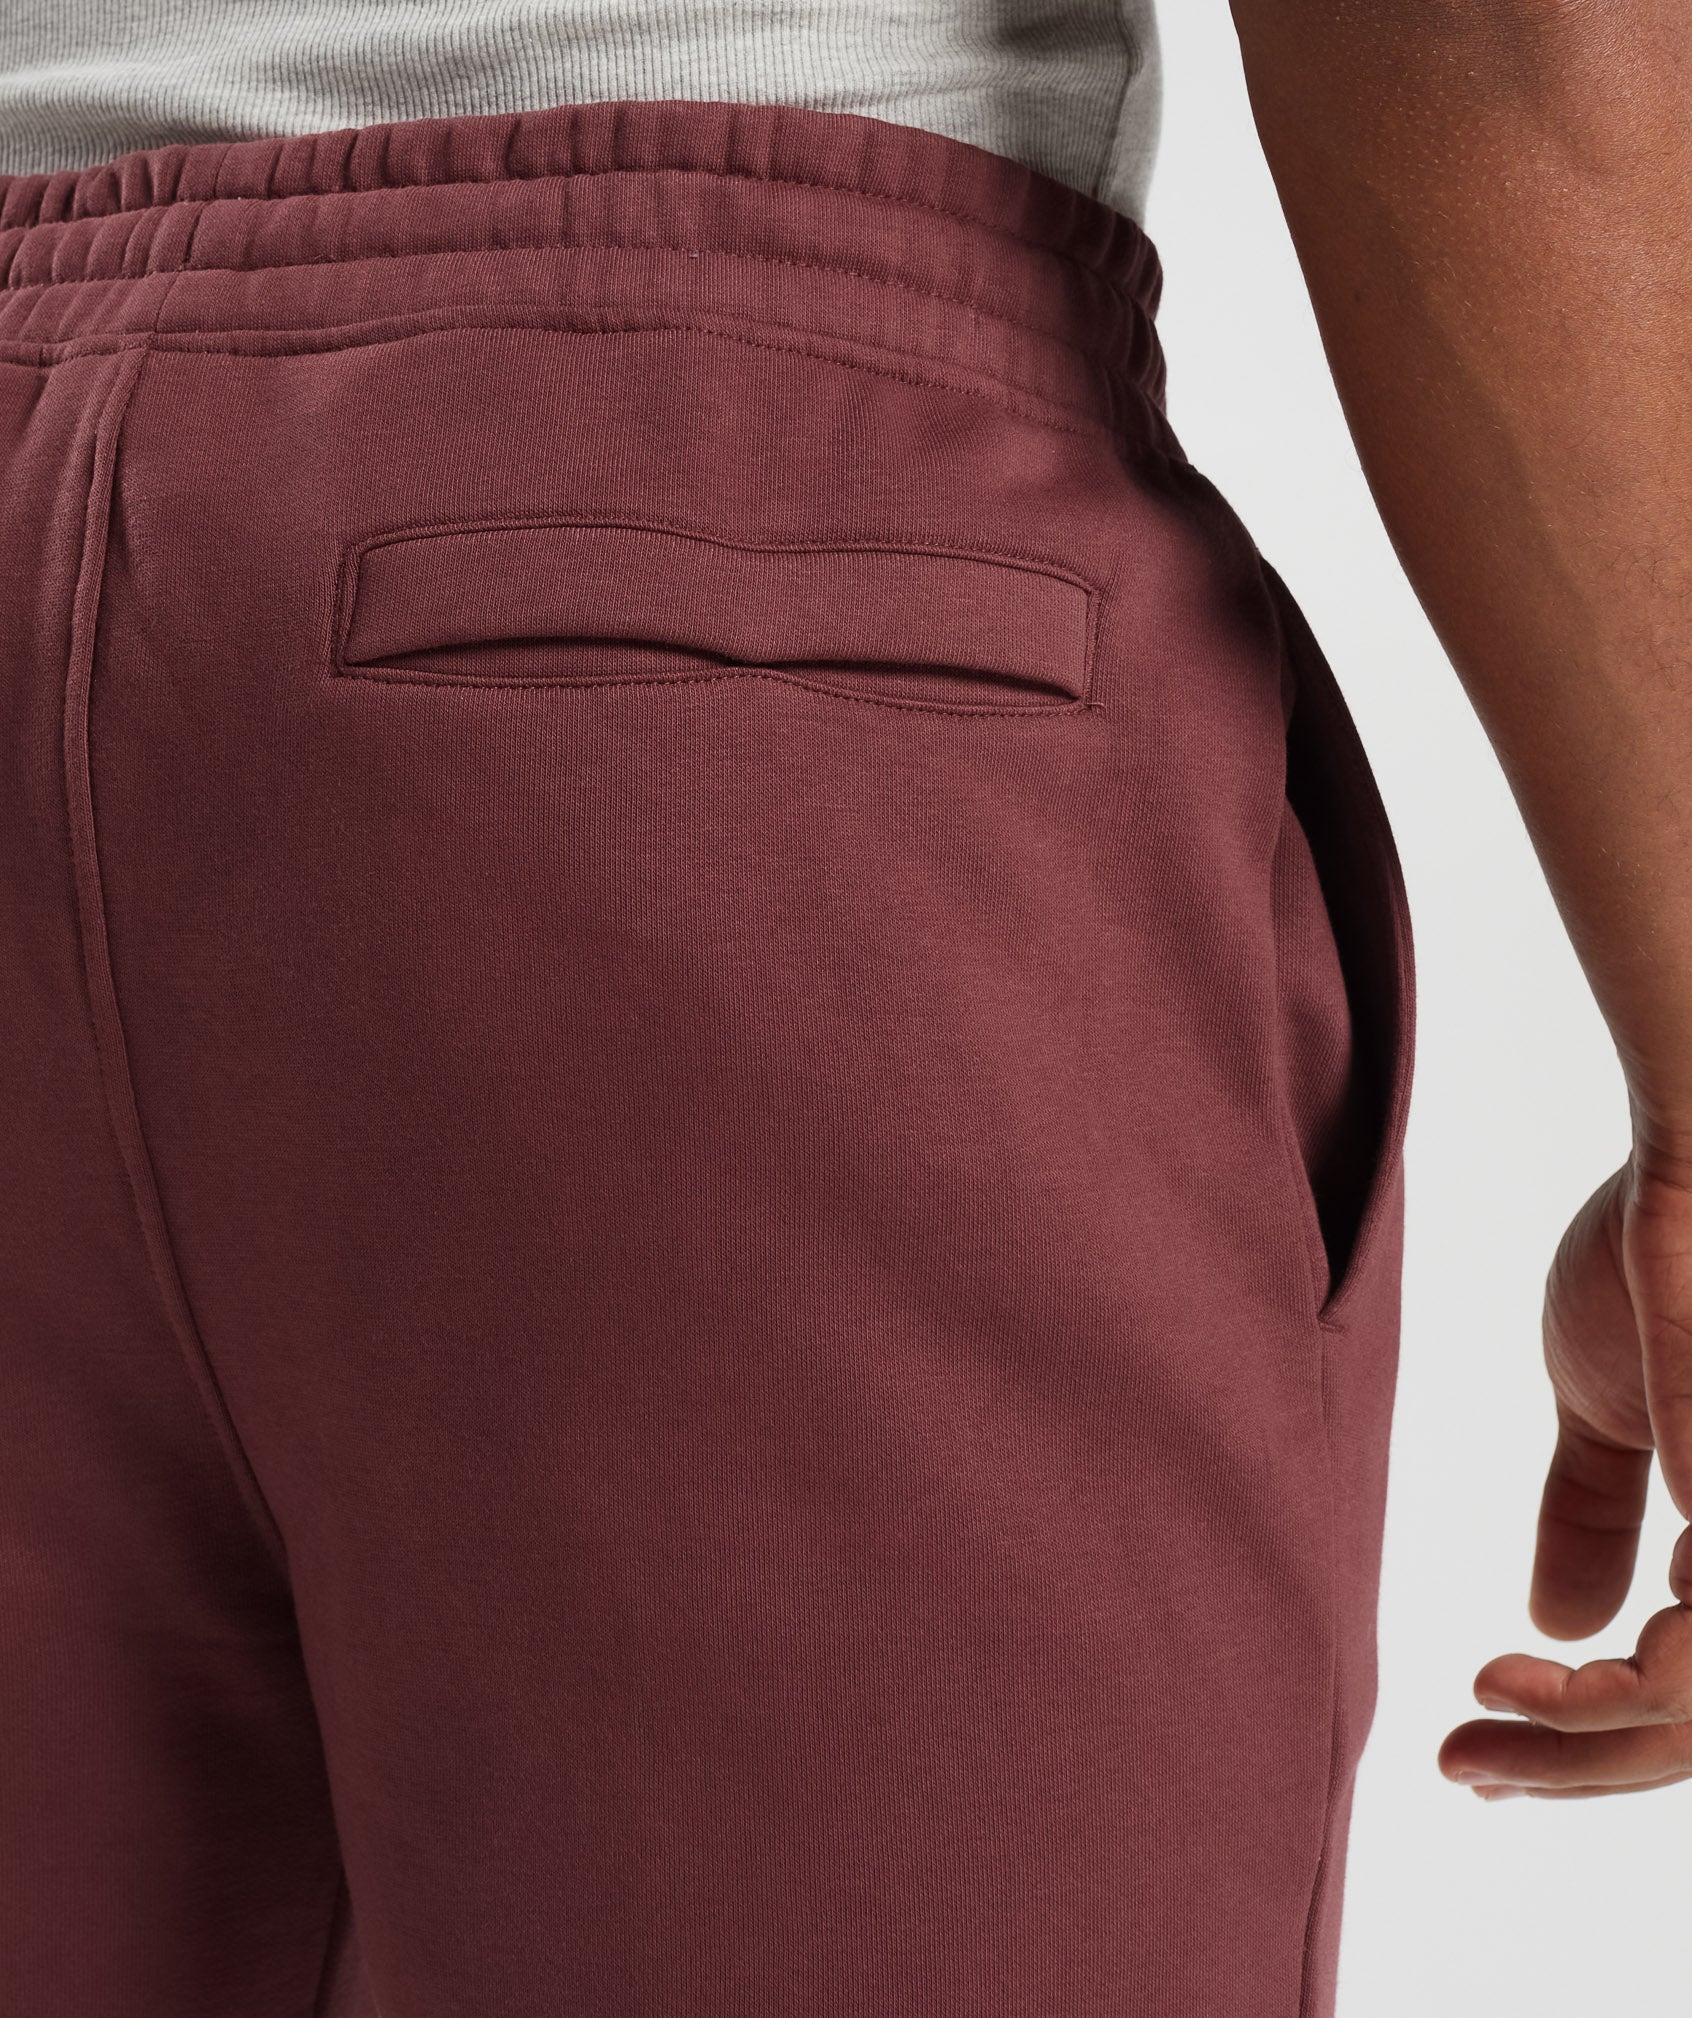 Crest Joggers in Washed Burgundy - view 6